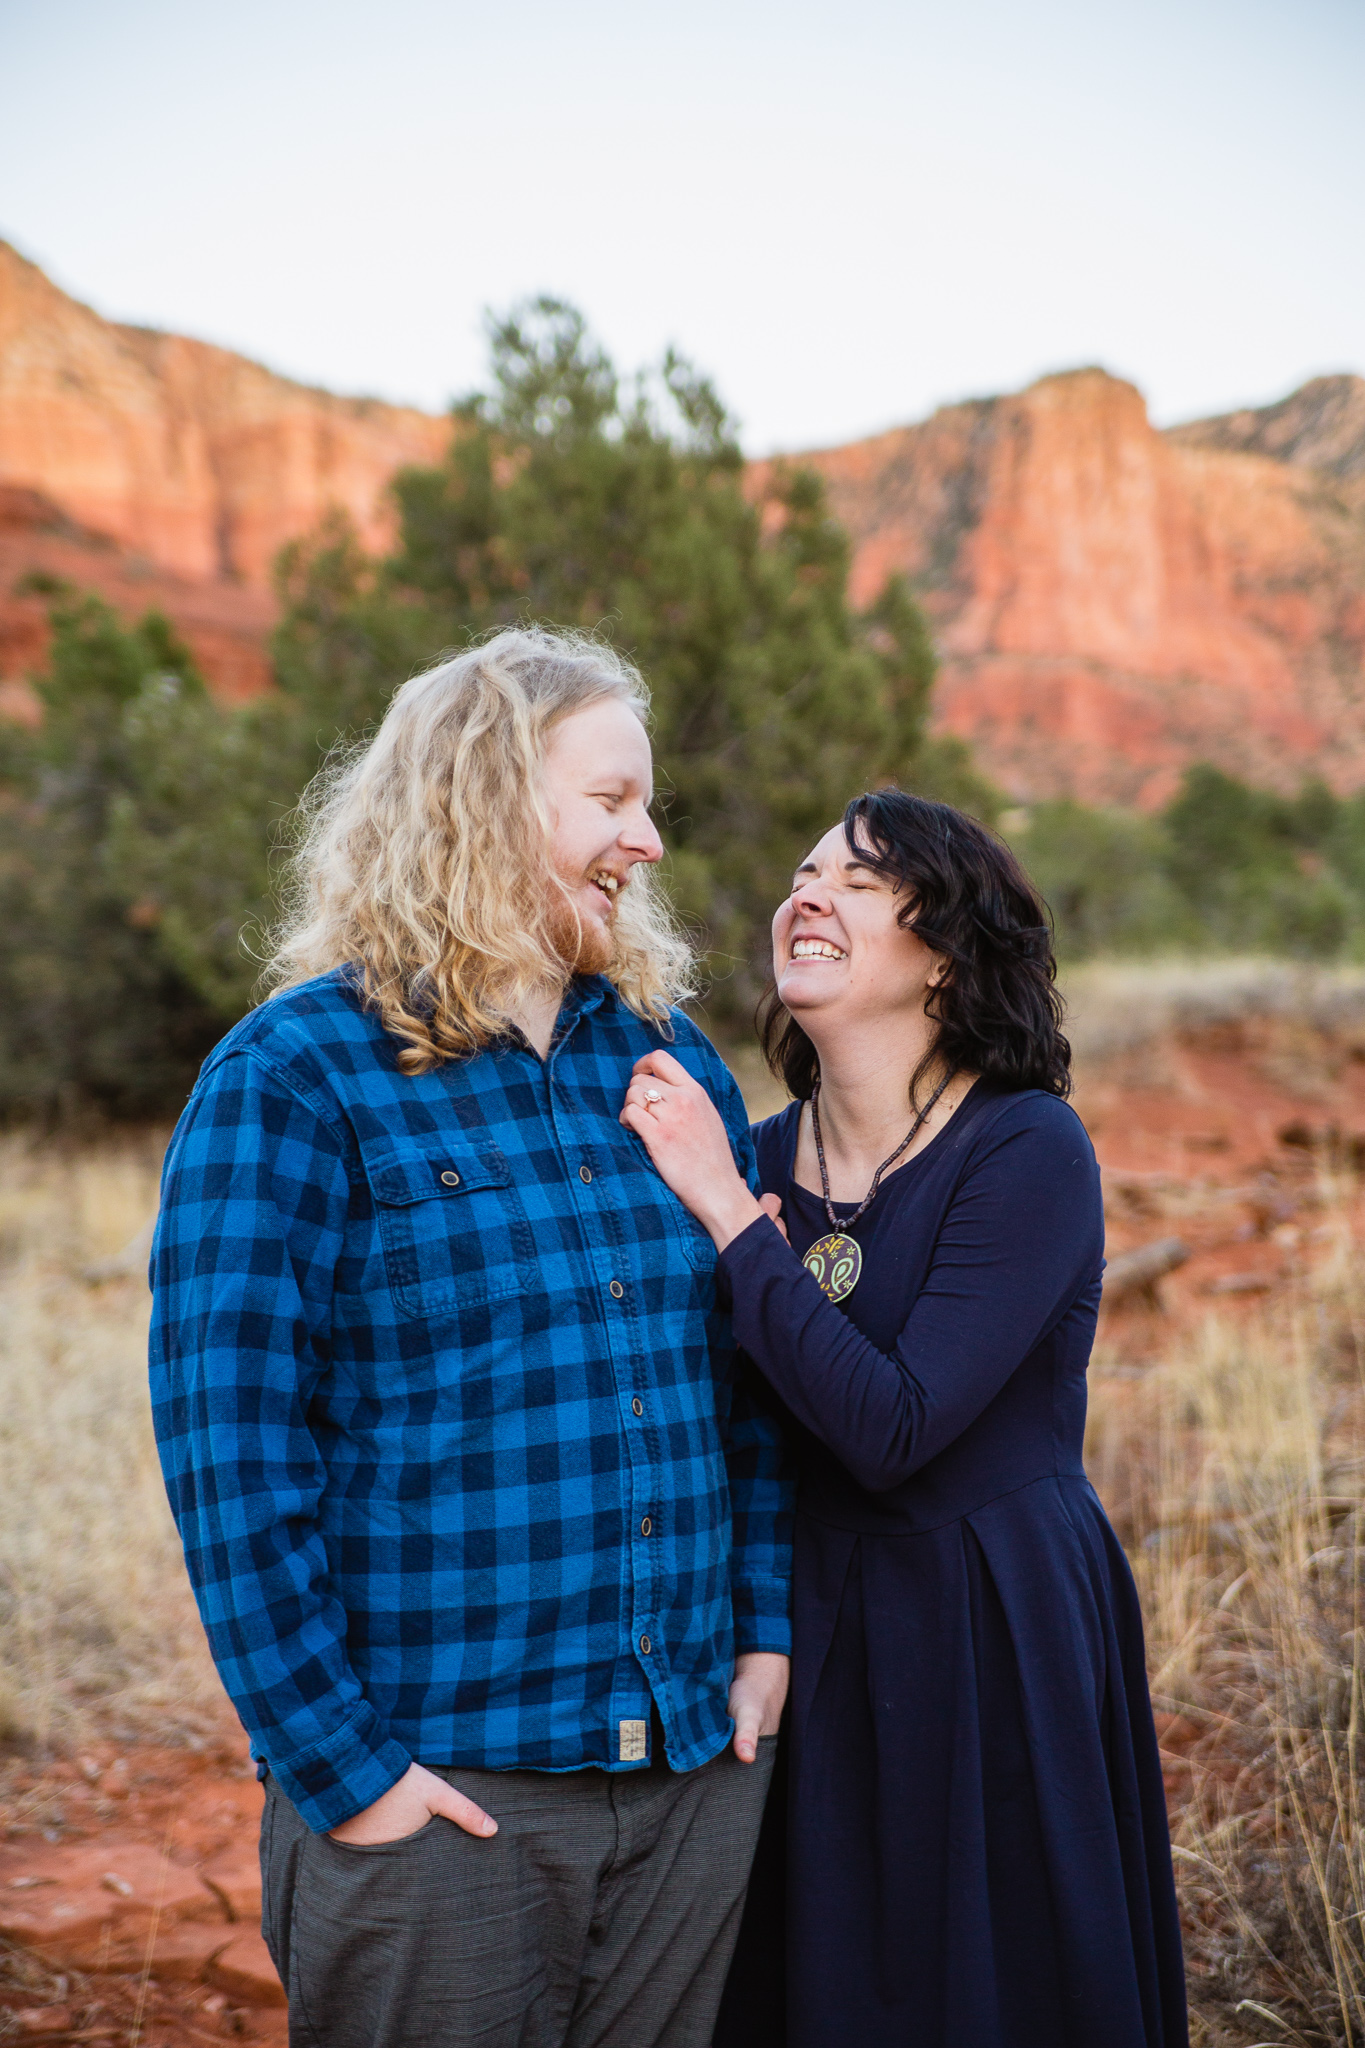 Couple laughing together during engagement session surrounded by the red rocks of Sedona by PMA Photography.